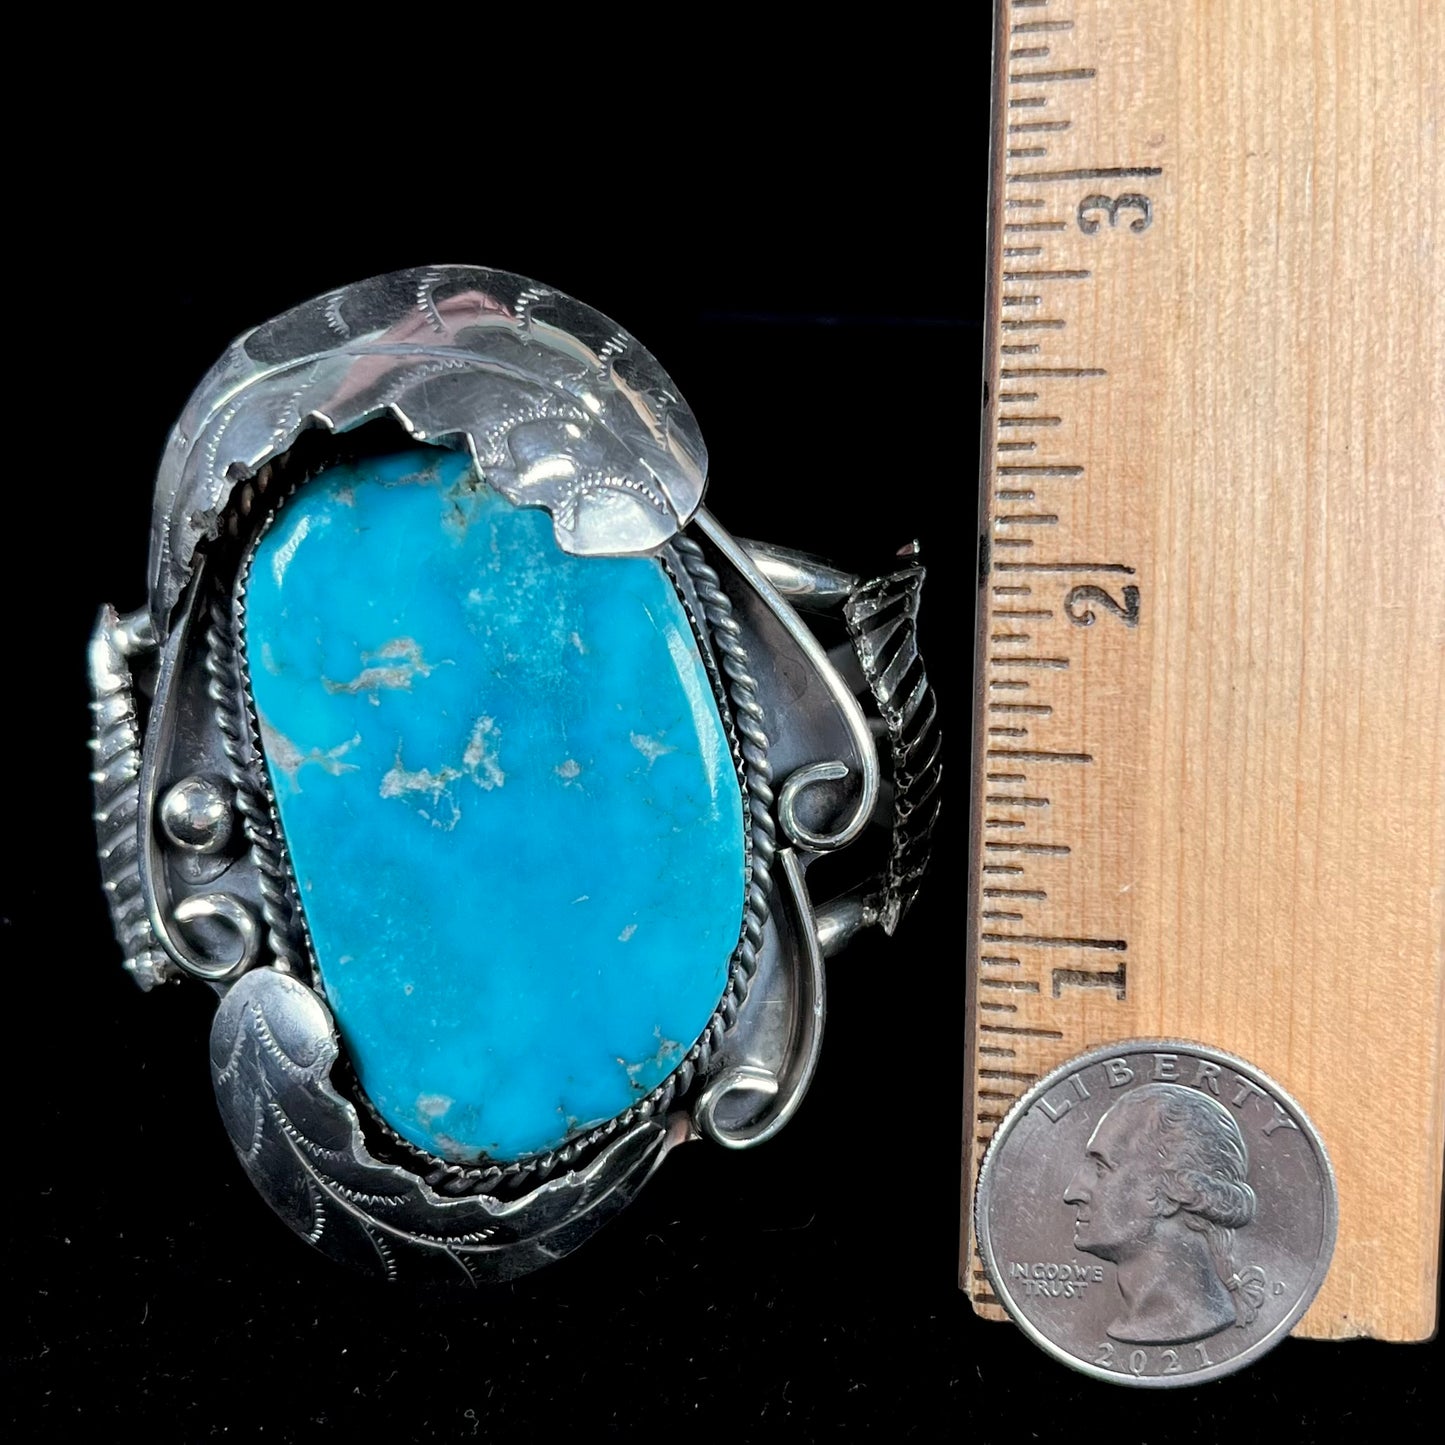 A Navajo Indian-made sterling silver cuff bracelet set with a Sleeping Beauty turquoise stone.